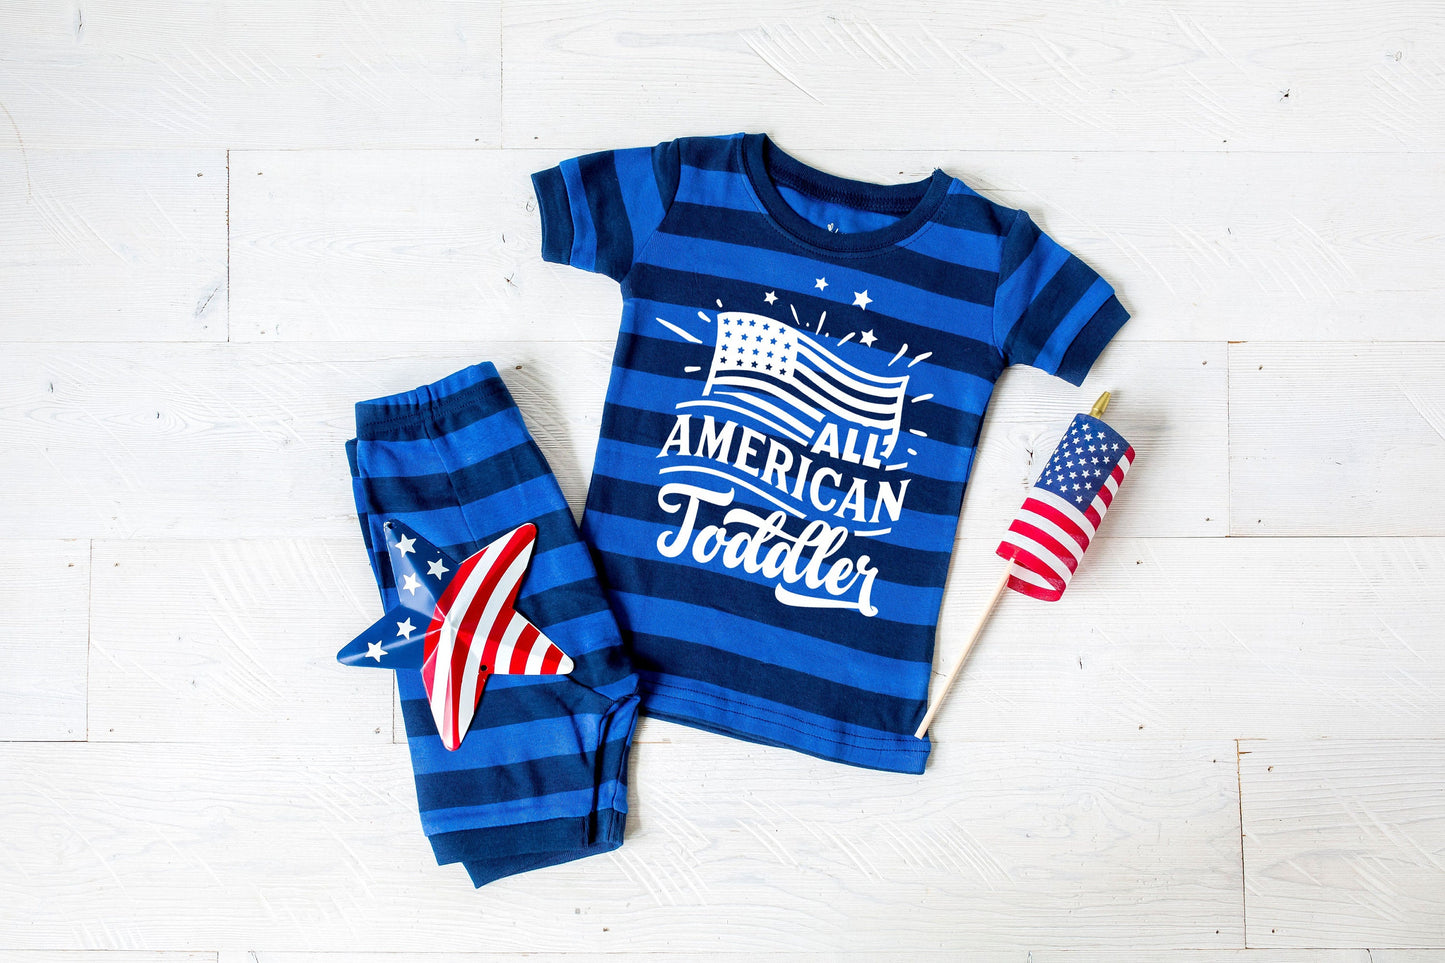 All American Toddler Blue Striped Shorts Toddler Pajamas - Kids 4th of July Pajamas - 4th of July Toddler Pajamas - Toddler Boy - Toddler PJ